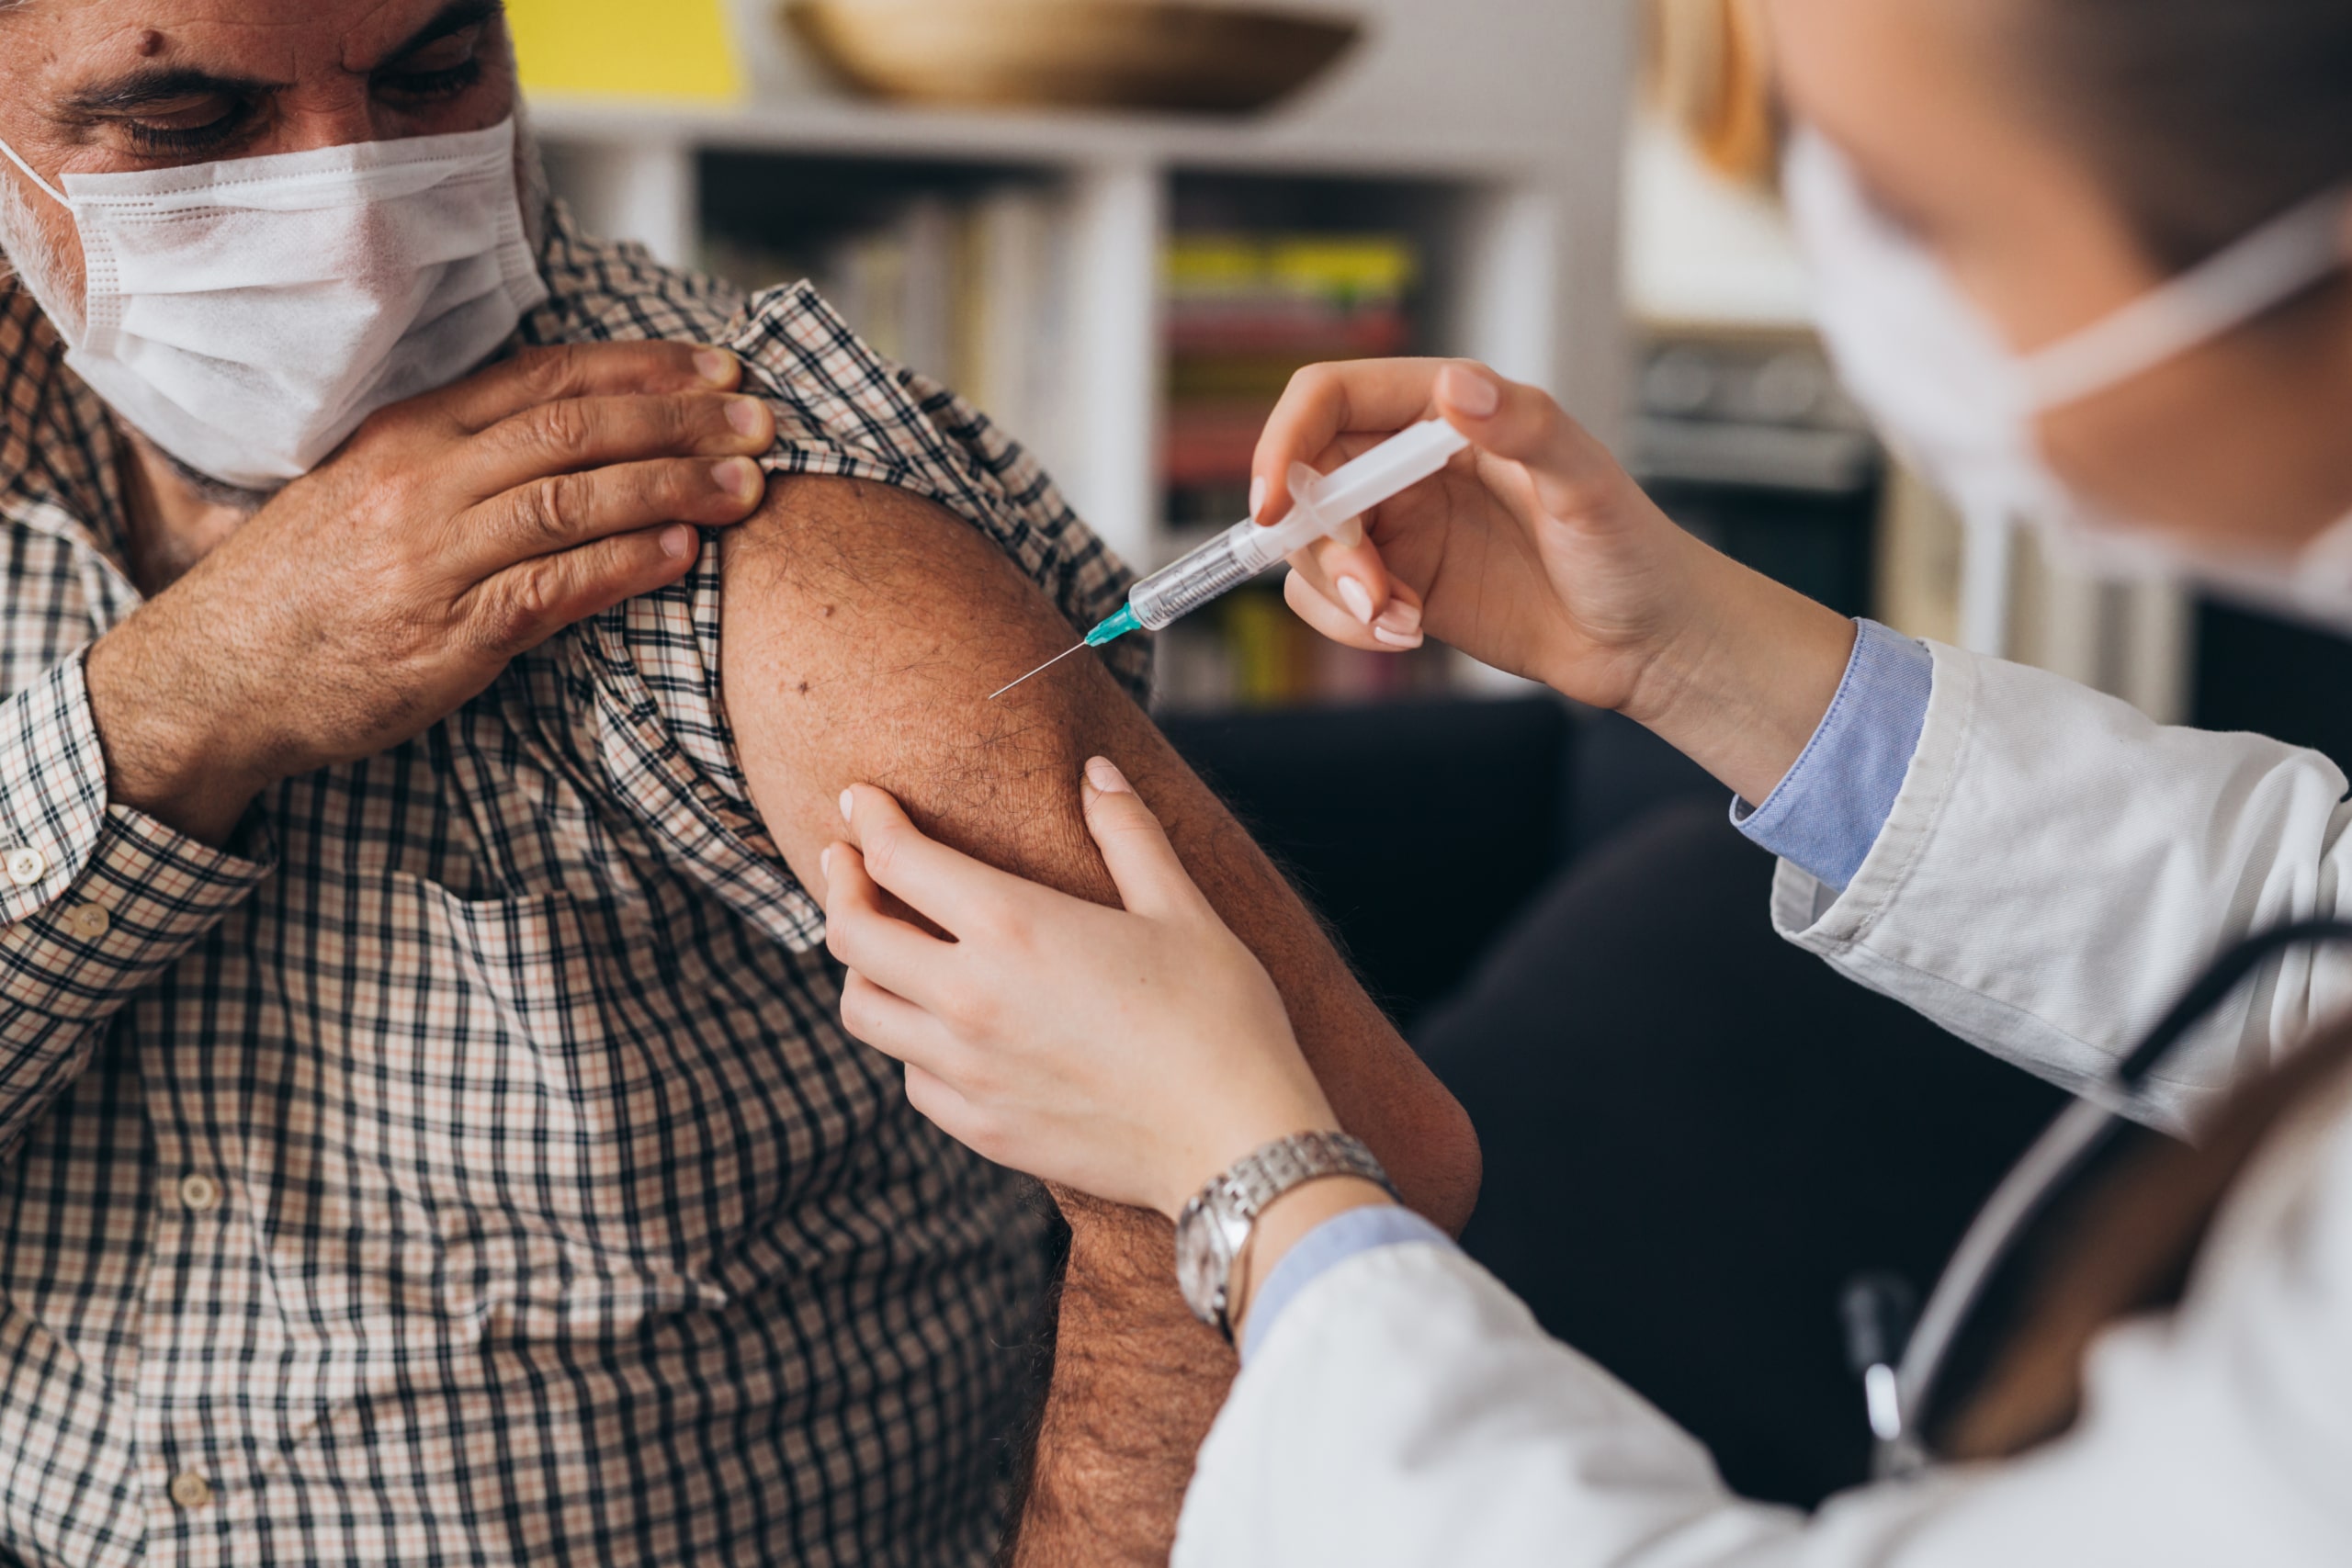 Masked older Hispanic male getting a vaccine administered by a physician in a white lab coat.